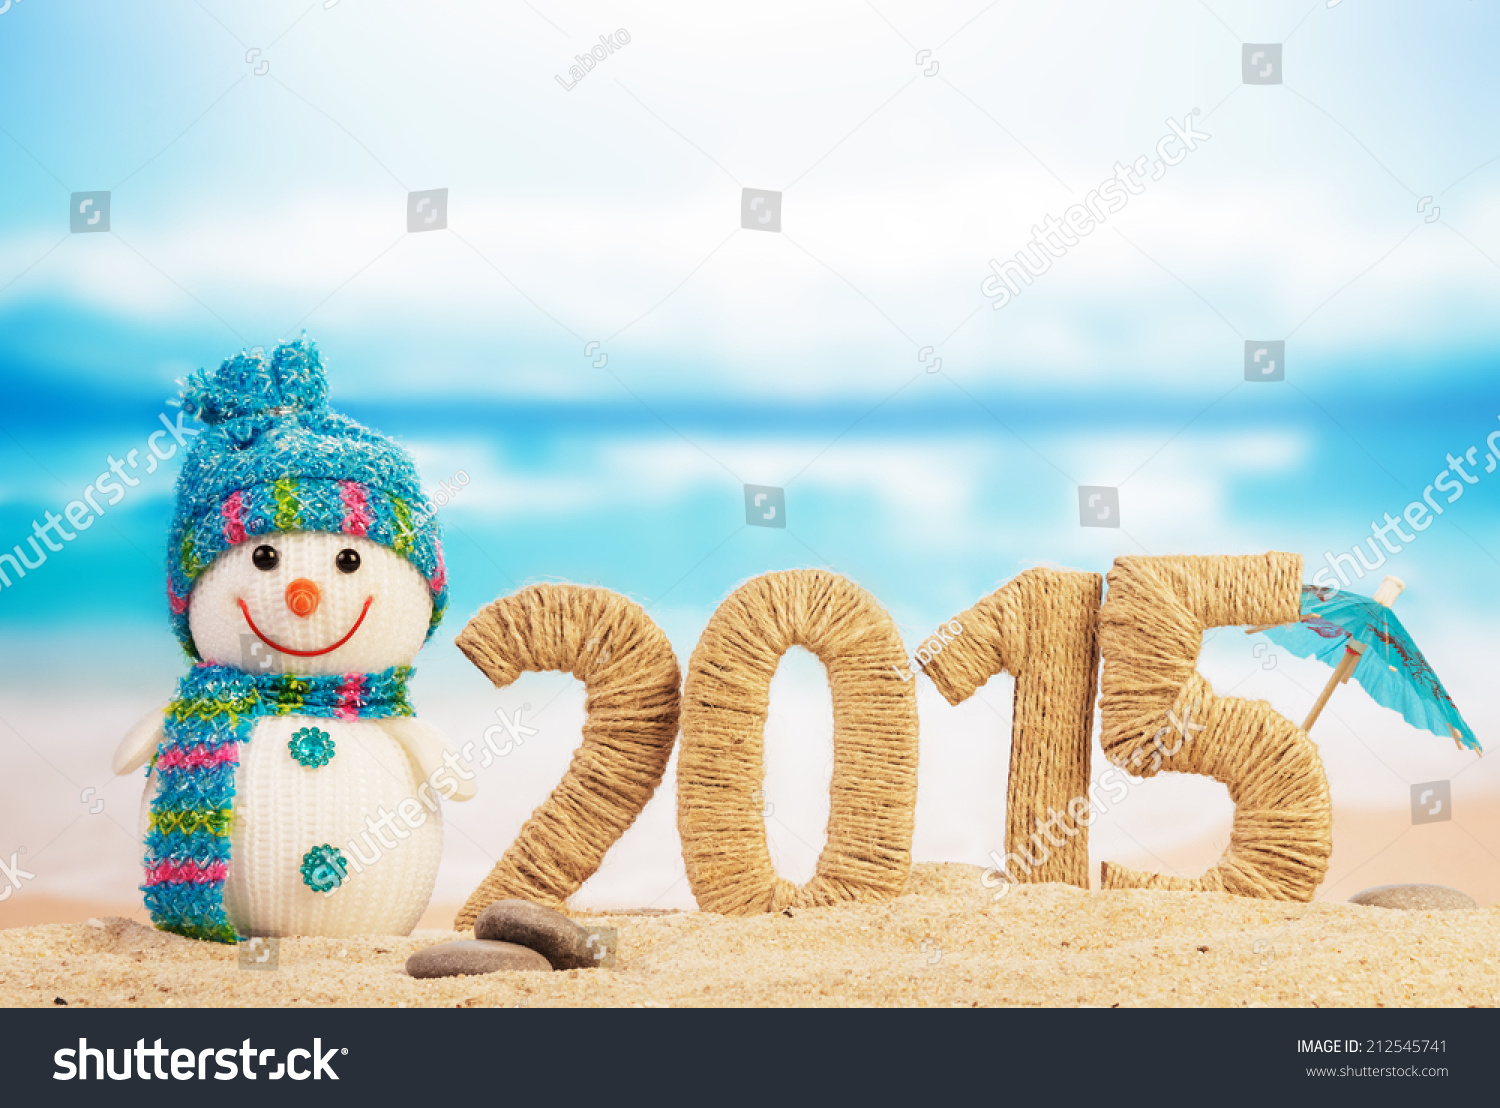 New year 2015 sign with snowman on beach background #212545741